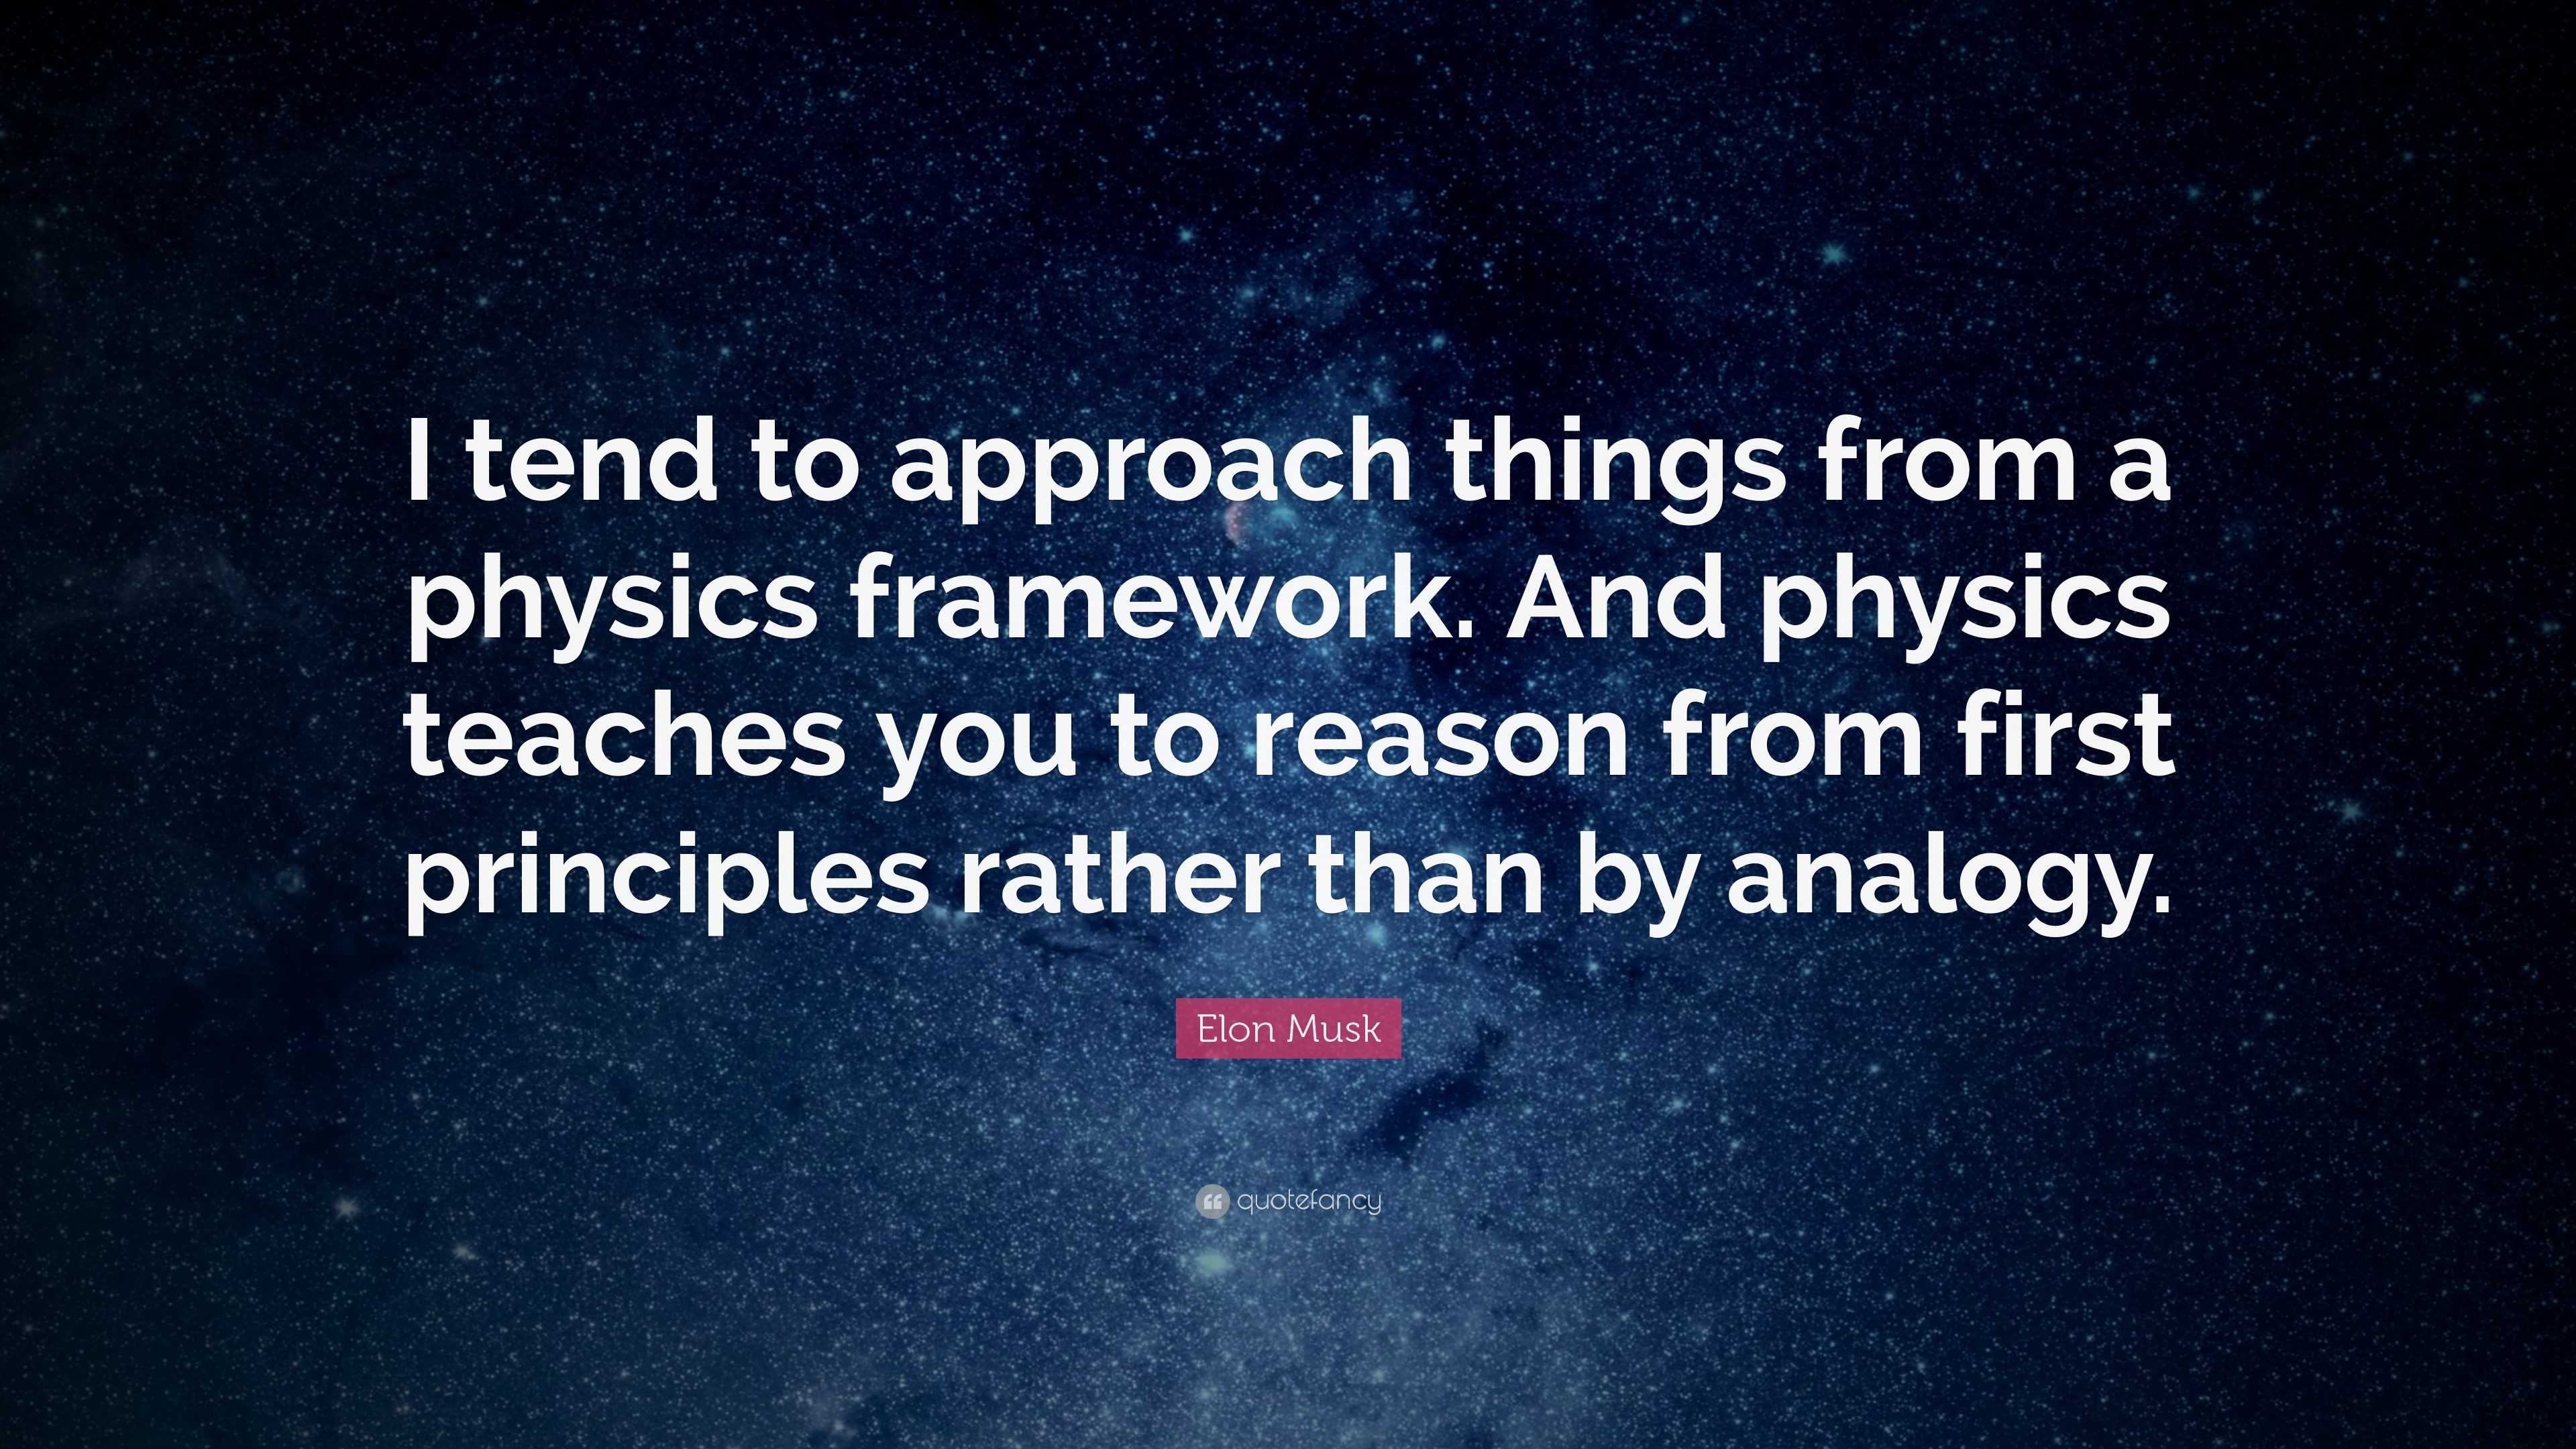 Elon Musk Quote: “I tend to approach things from a physics framework. And